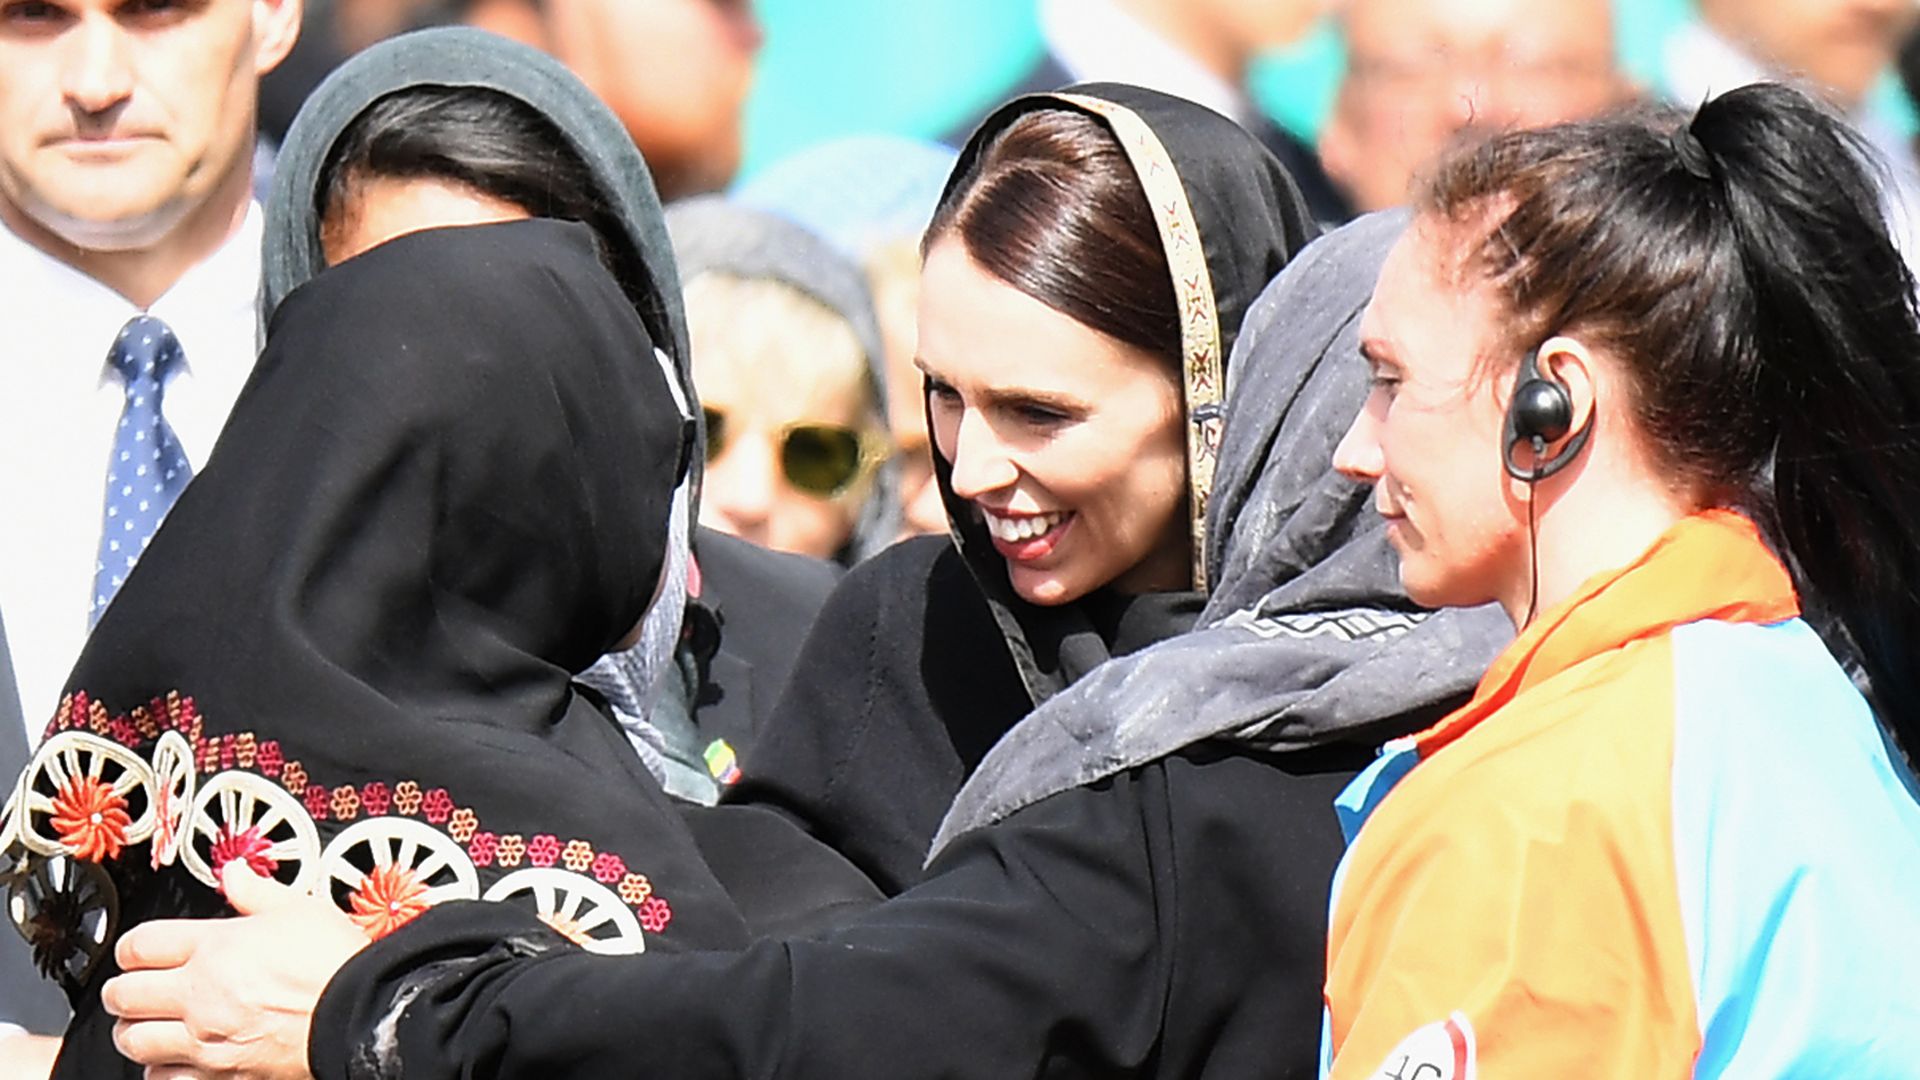 New Zealand Prime Minister Jacinda Ardern hugs a woman during the country's day of reflection for attack victims.